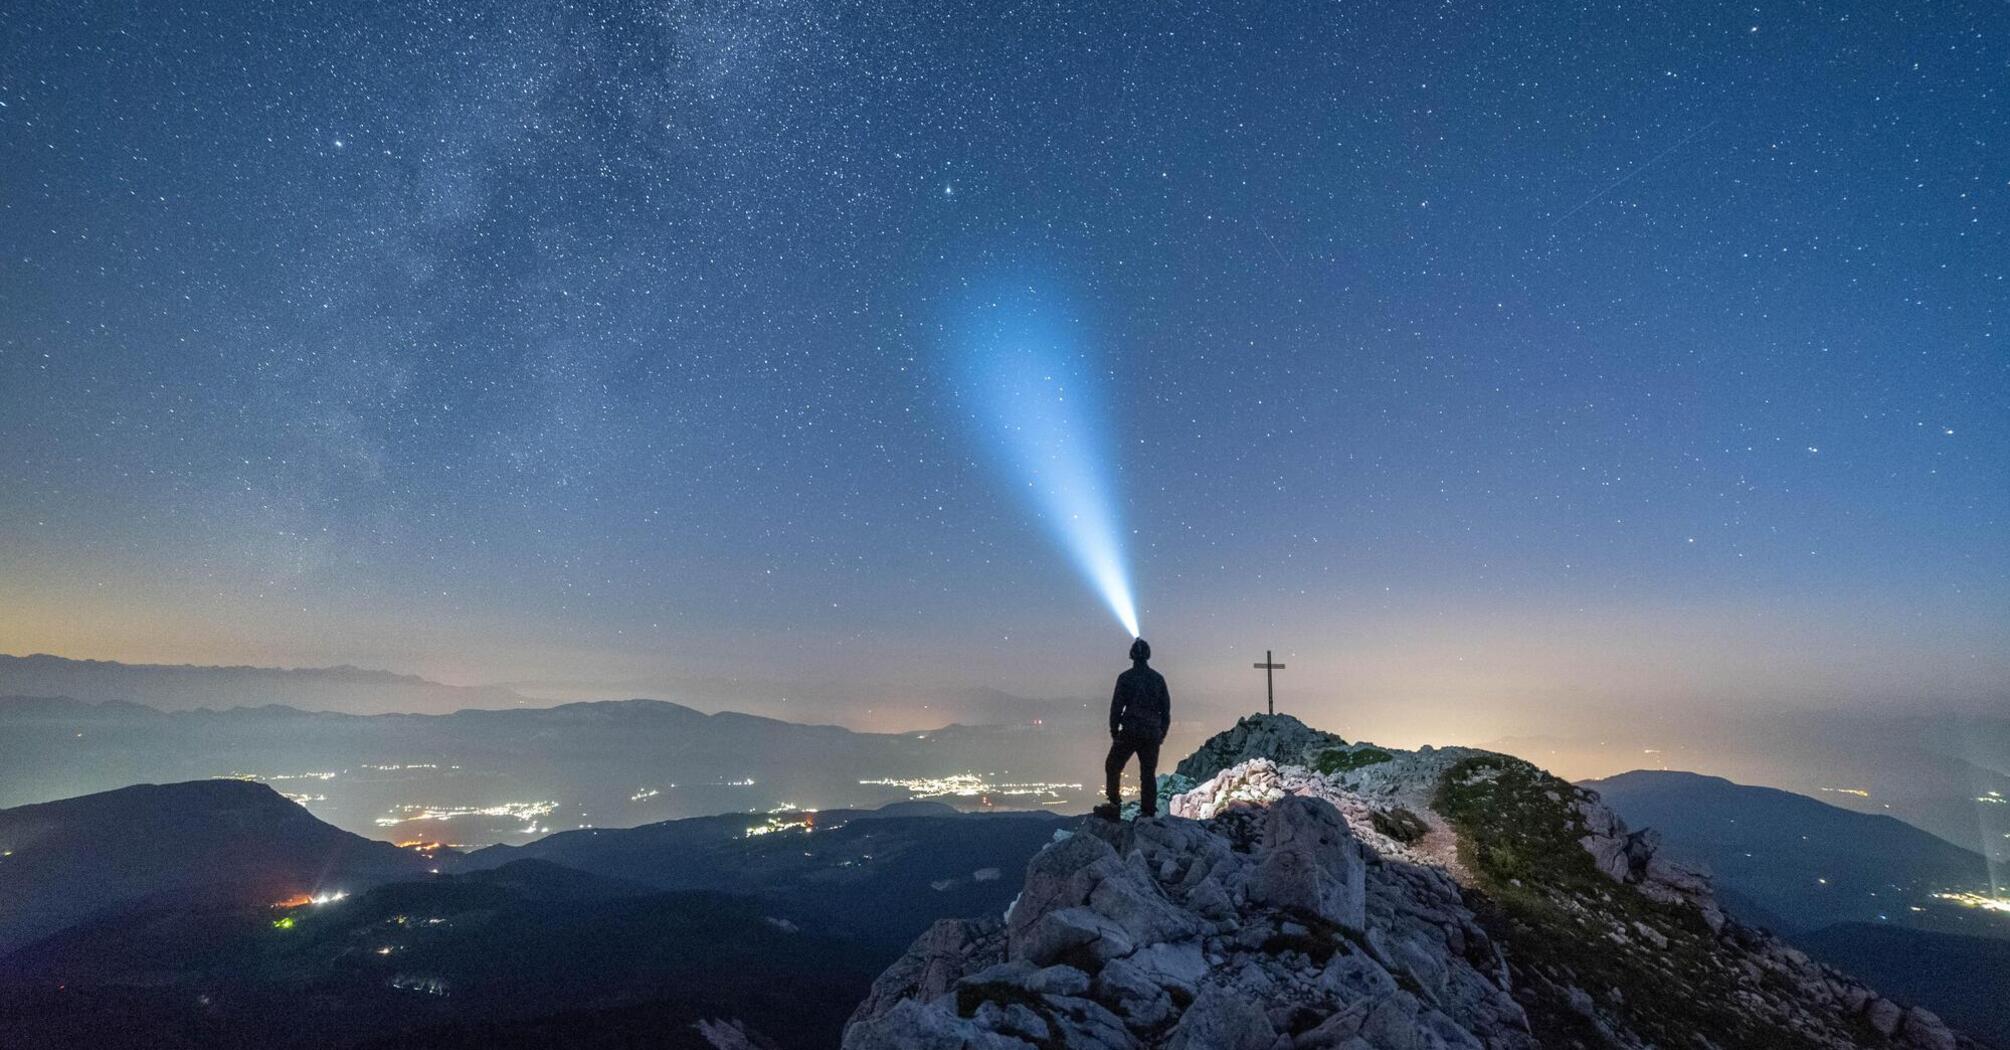 Spectacular and dangerous: recommendations for night hikes